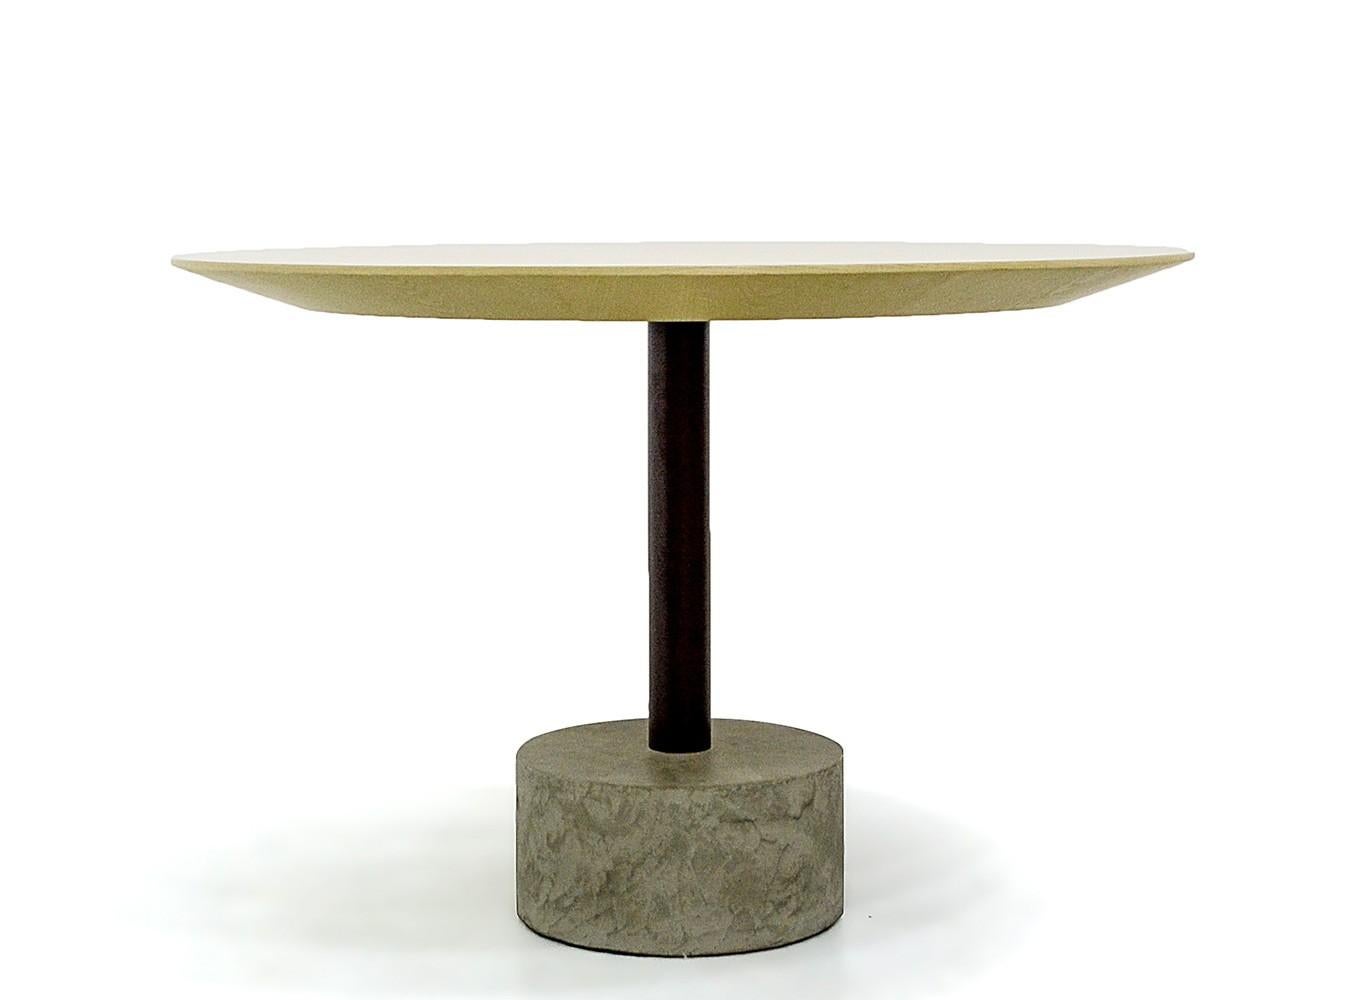 This beautiful table is made in concrete, steel and oak. It can serve multiple purposes and fit into different kinds of interiors, as it is available in various possible dimensions. The author, Arthur Casas, is one of the most important contemporary